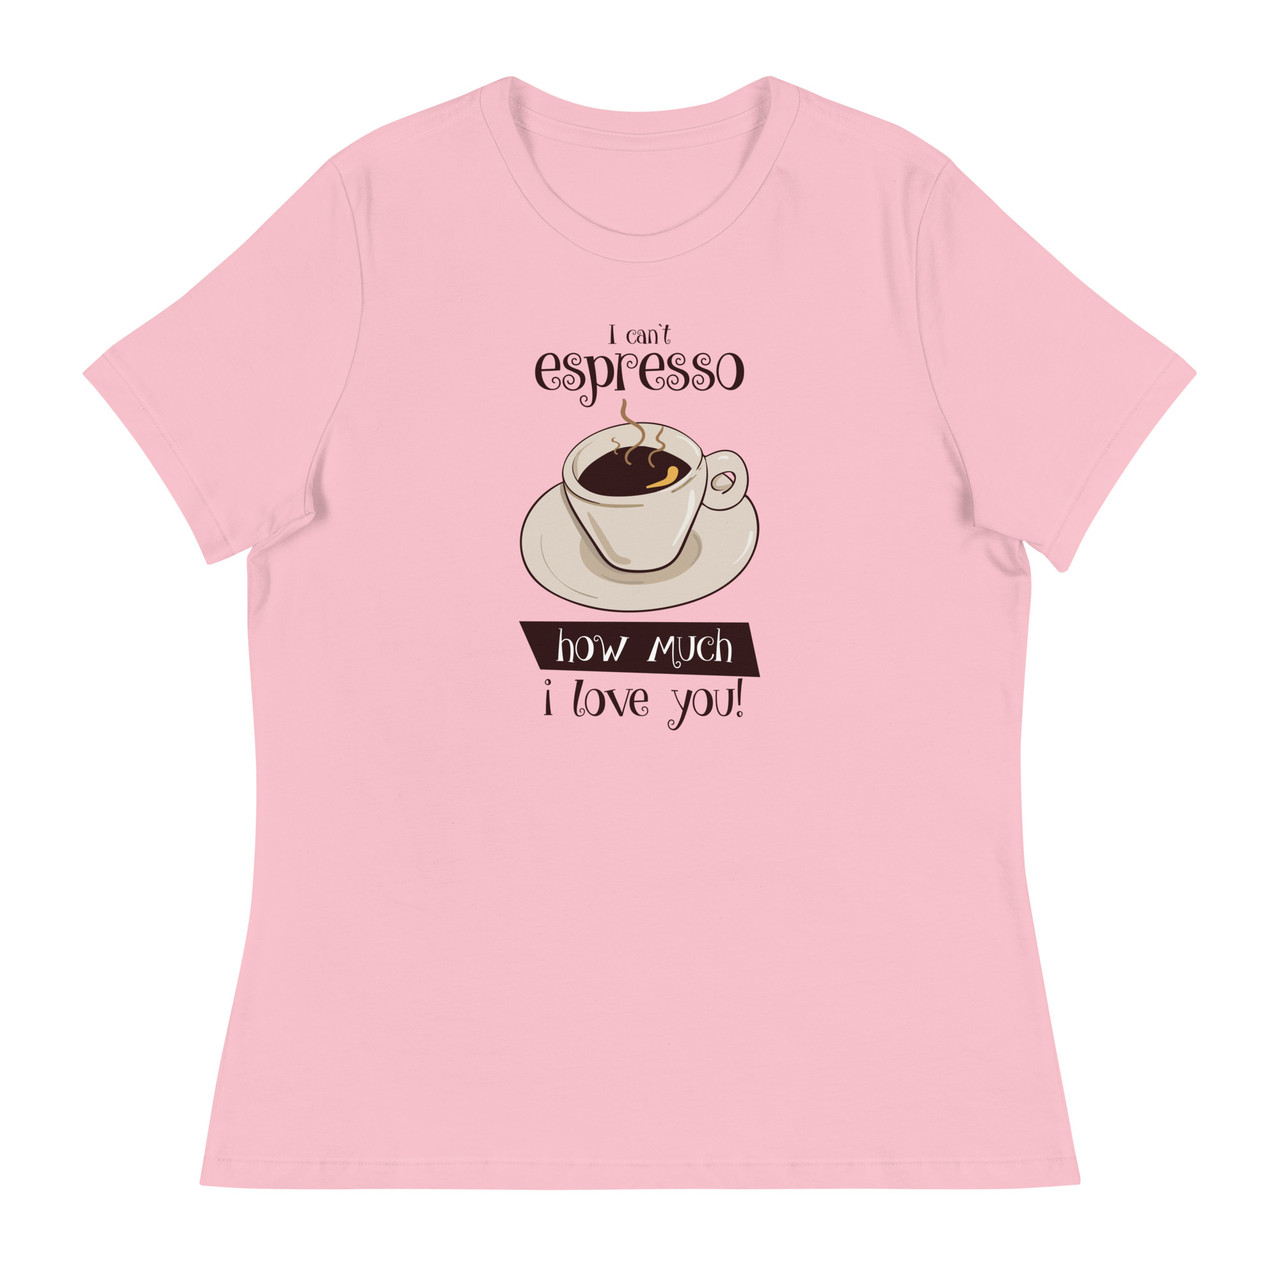 Espresso I love you Women's Relaxed T-Shirt - Bella + Canvas 6400 